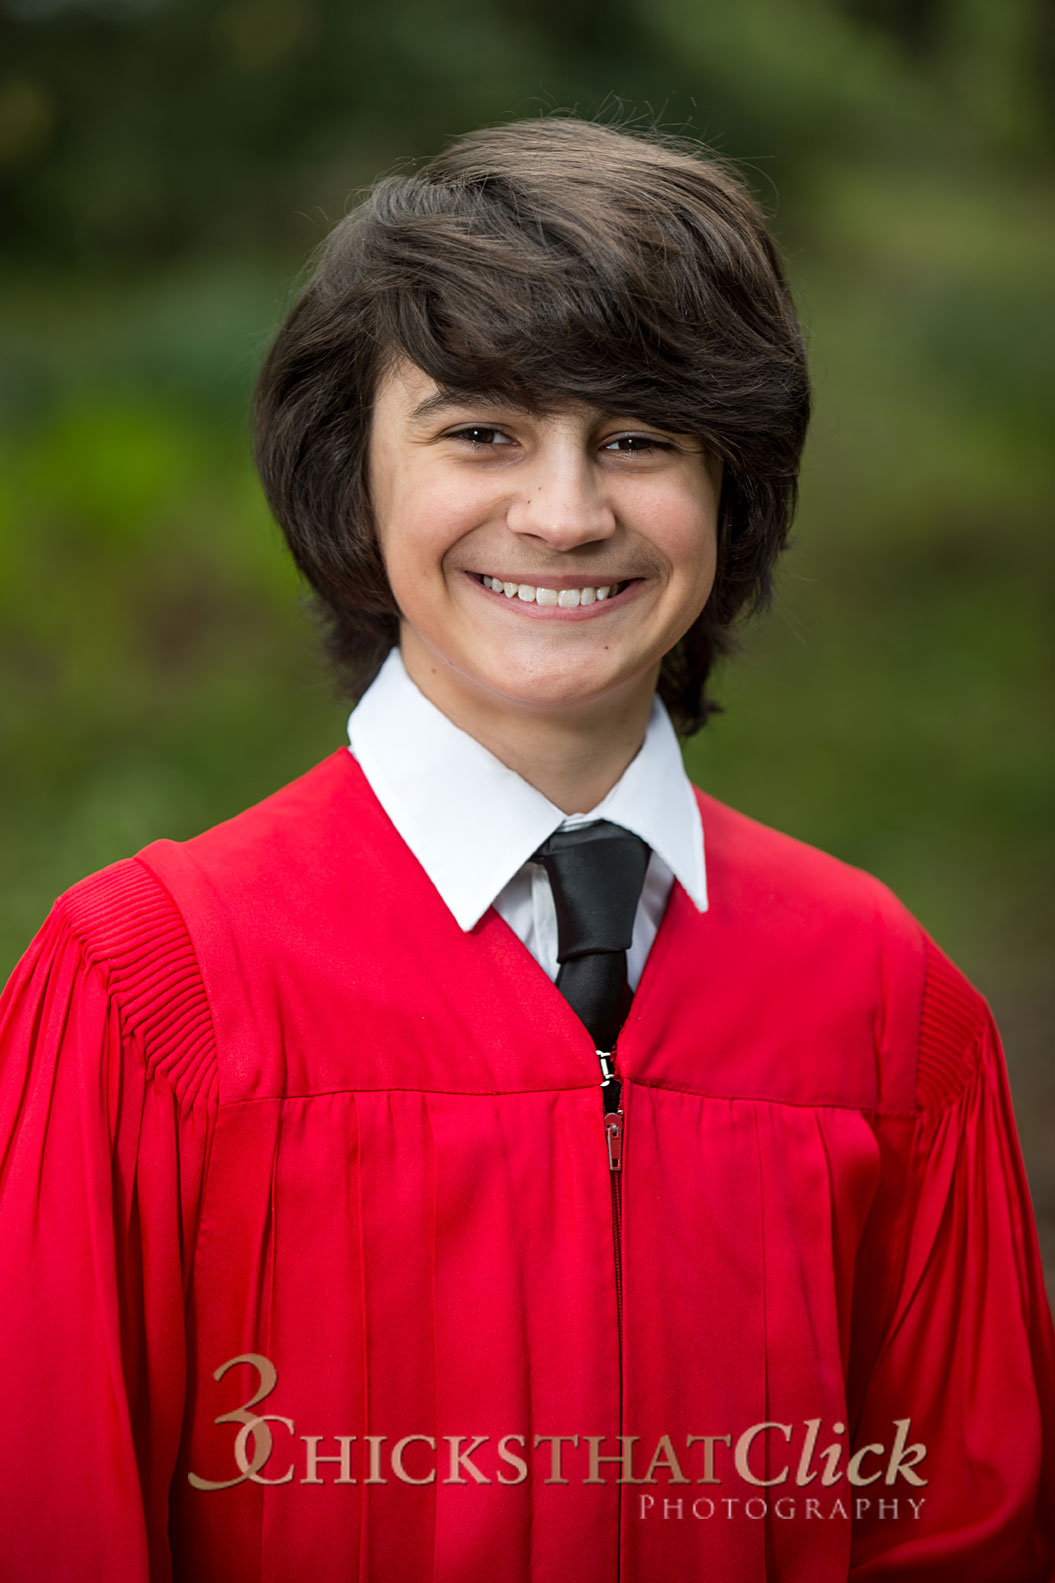 Photo of young man in red Confirmation gown